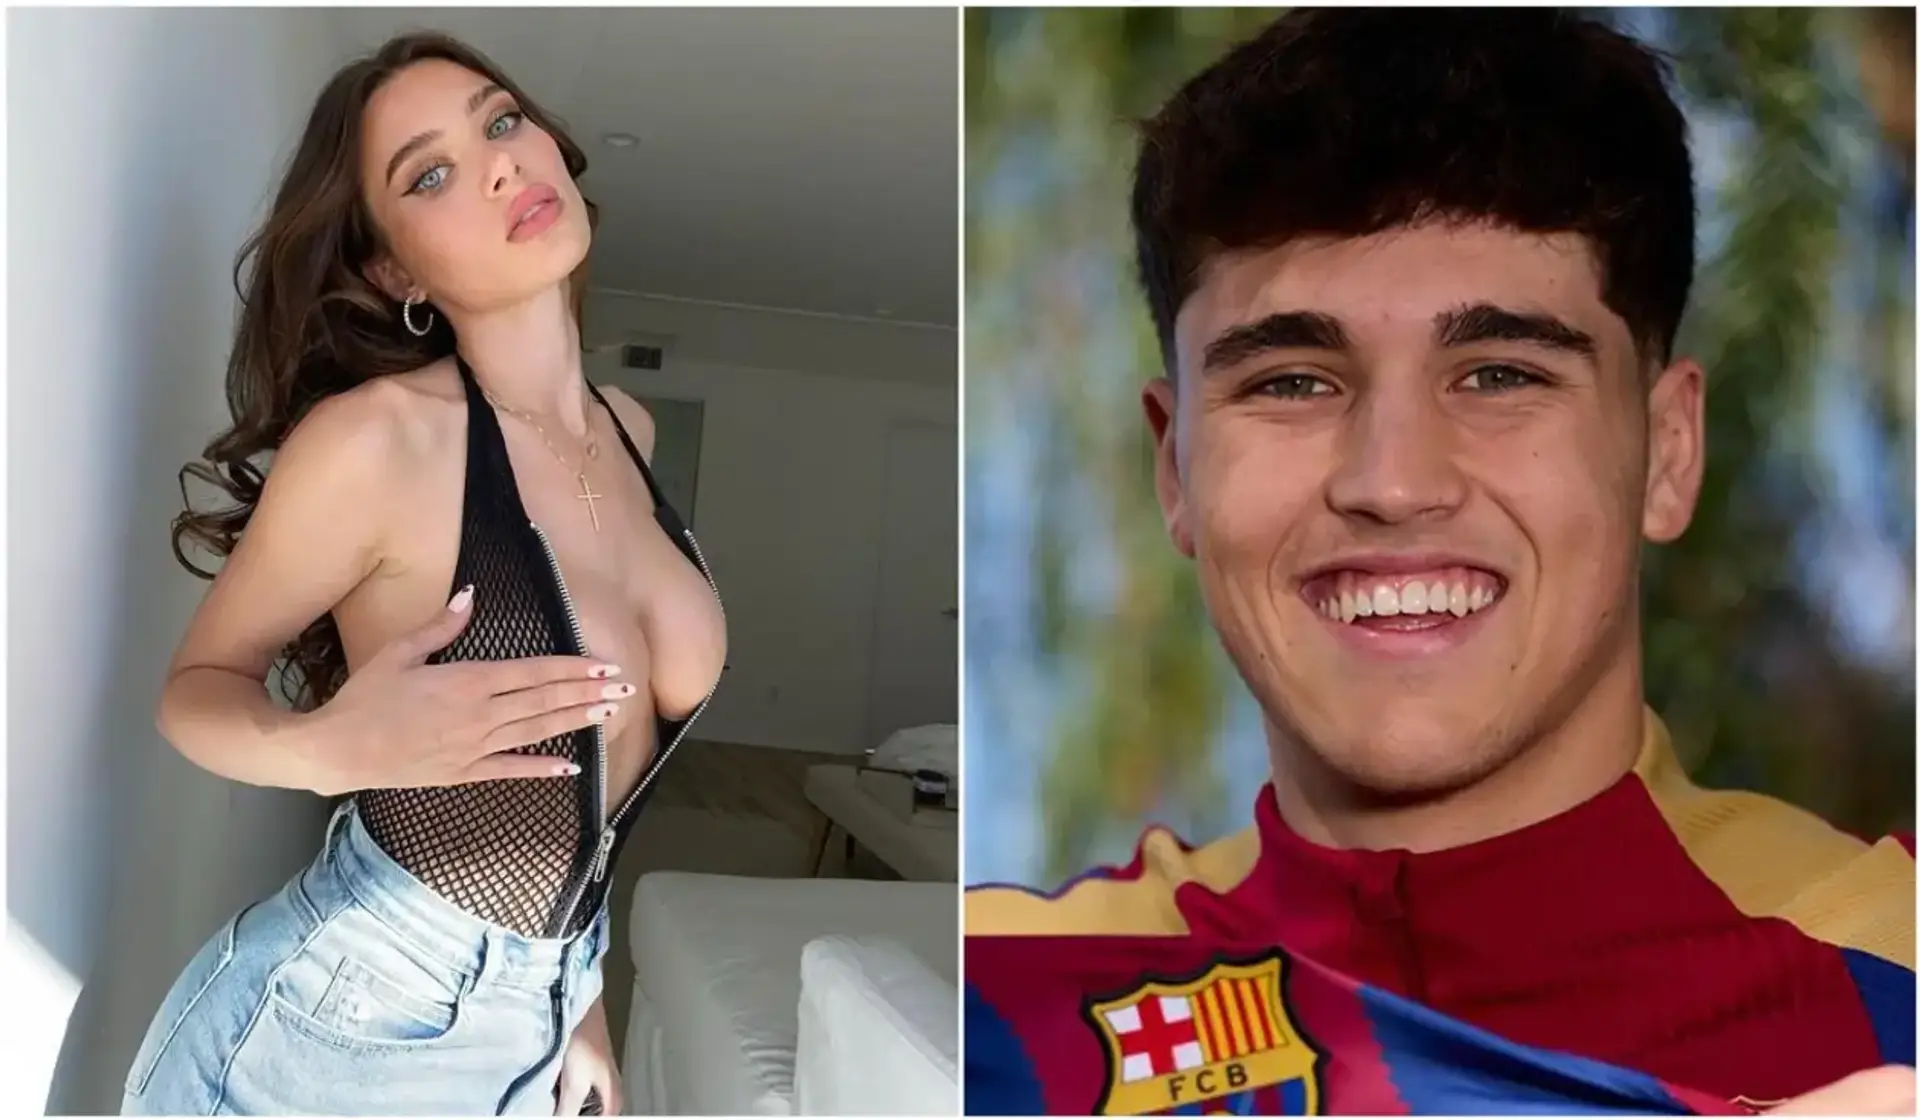 Barca star Pau Cubarsi caught liking all of porn star Lana Rhoades' posts on Instagram. Once fans noticed, he deleted them